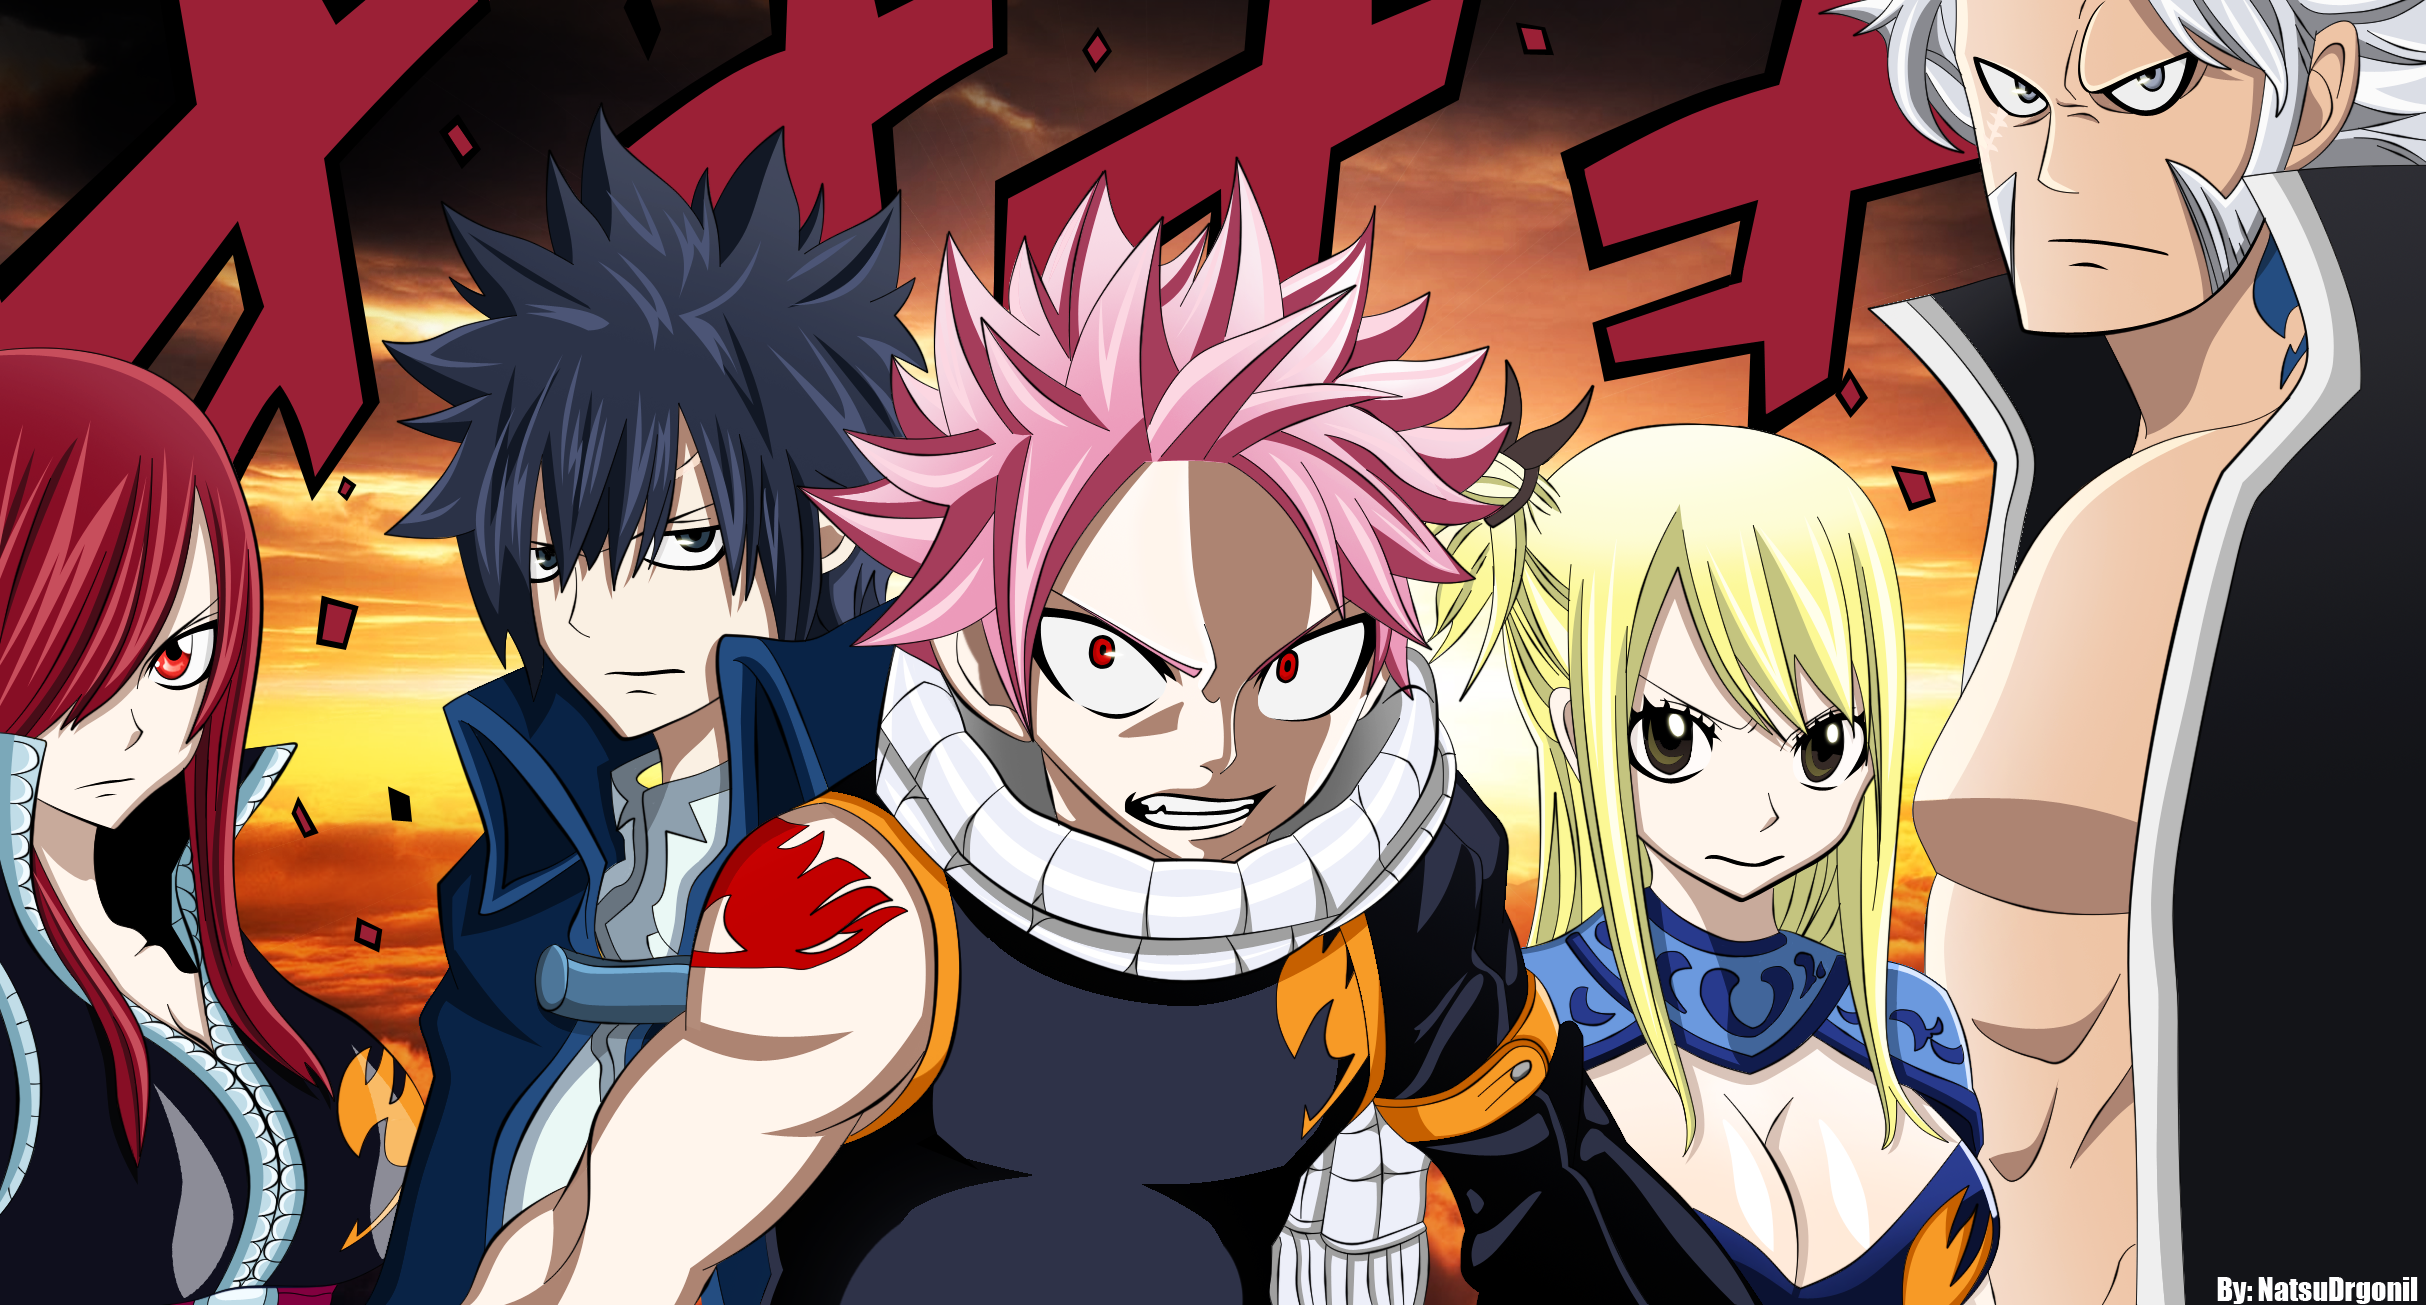 Free download fairy tail 267 manga wallpaper by natsudrgonil d4nah9a [2426x1305] for your Desktop, Mobile & Tablet. Explore Anime Wallpaper Fairy Tail. Lucy Fairy Tail Wallpaper